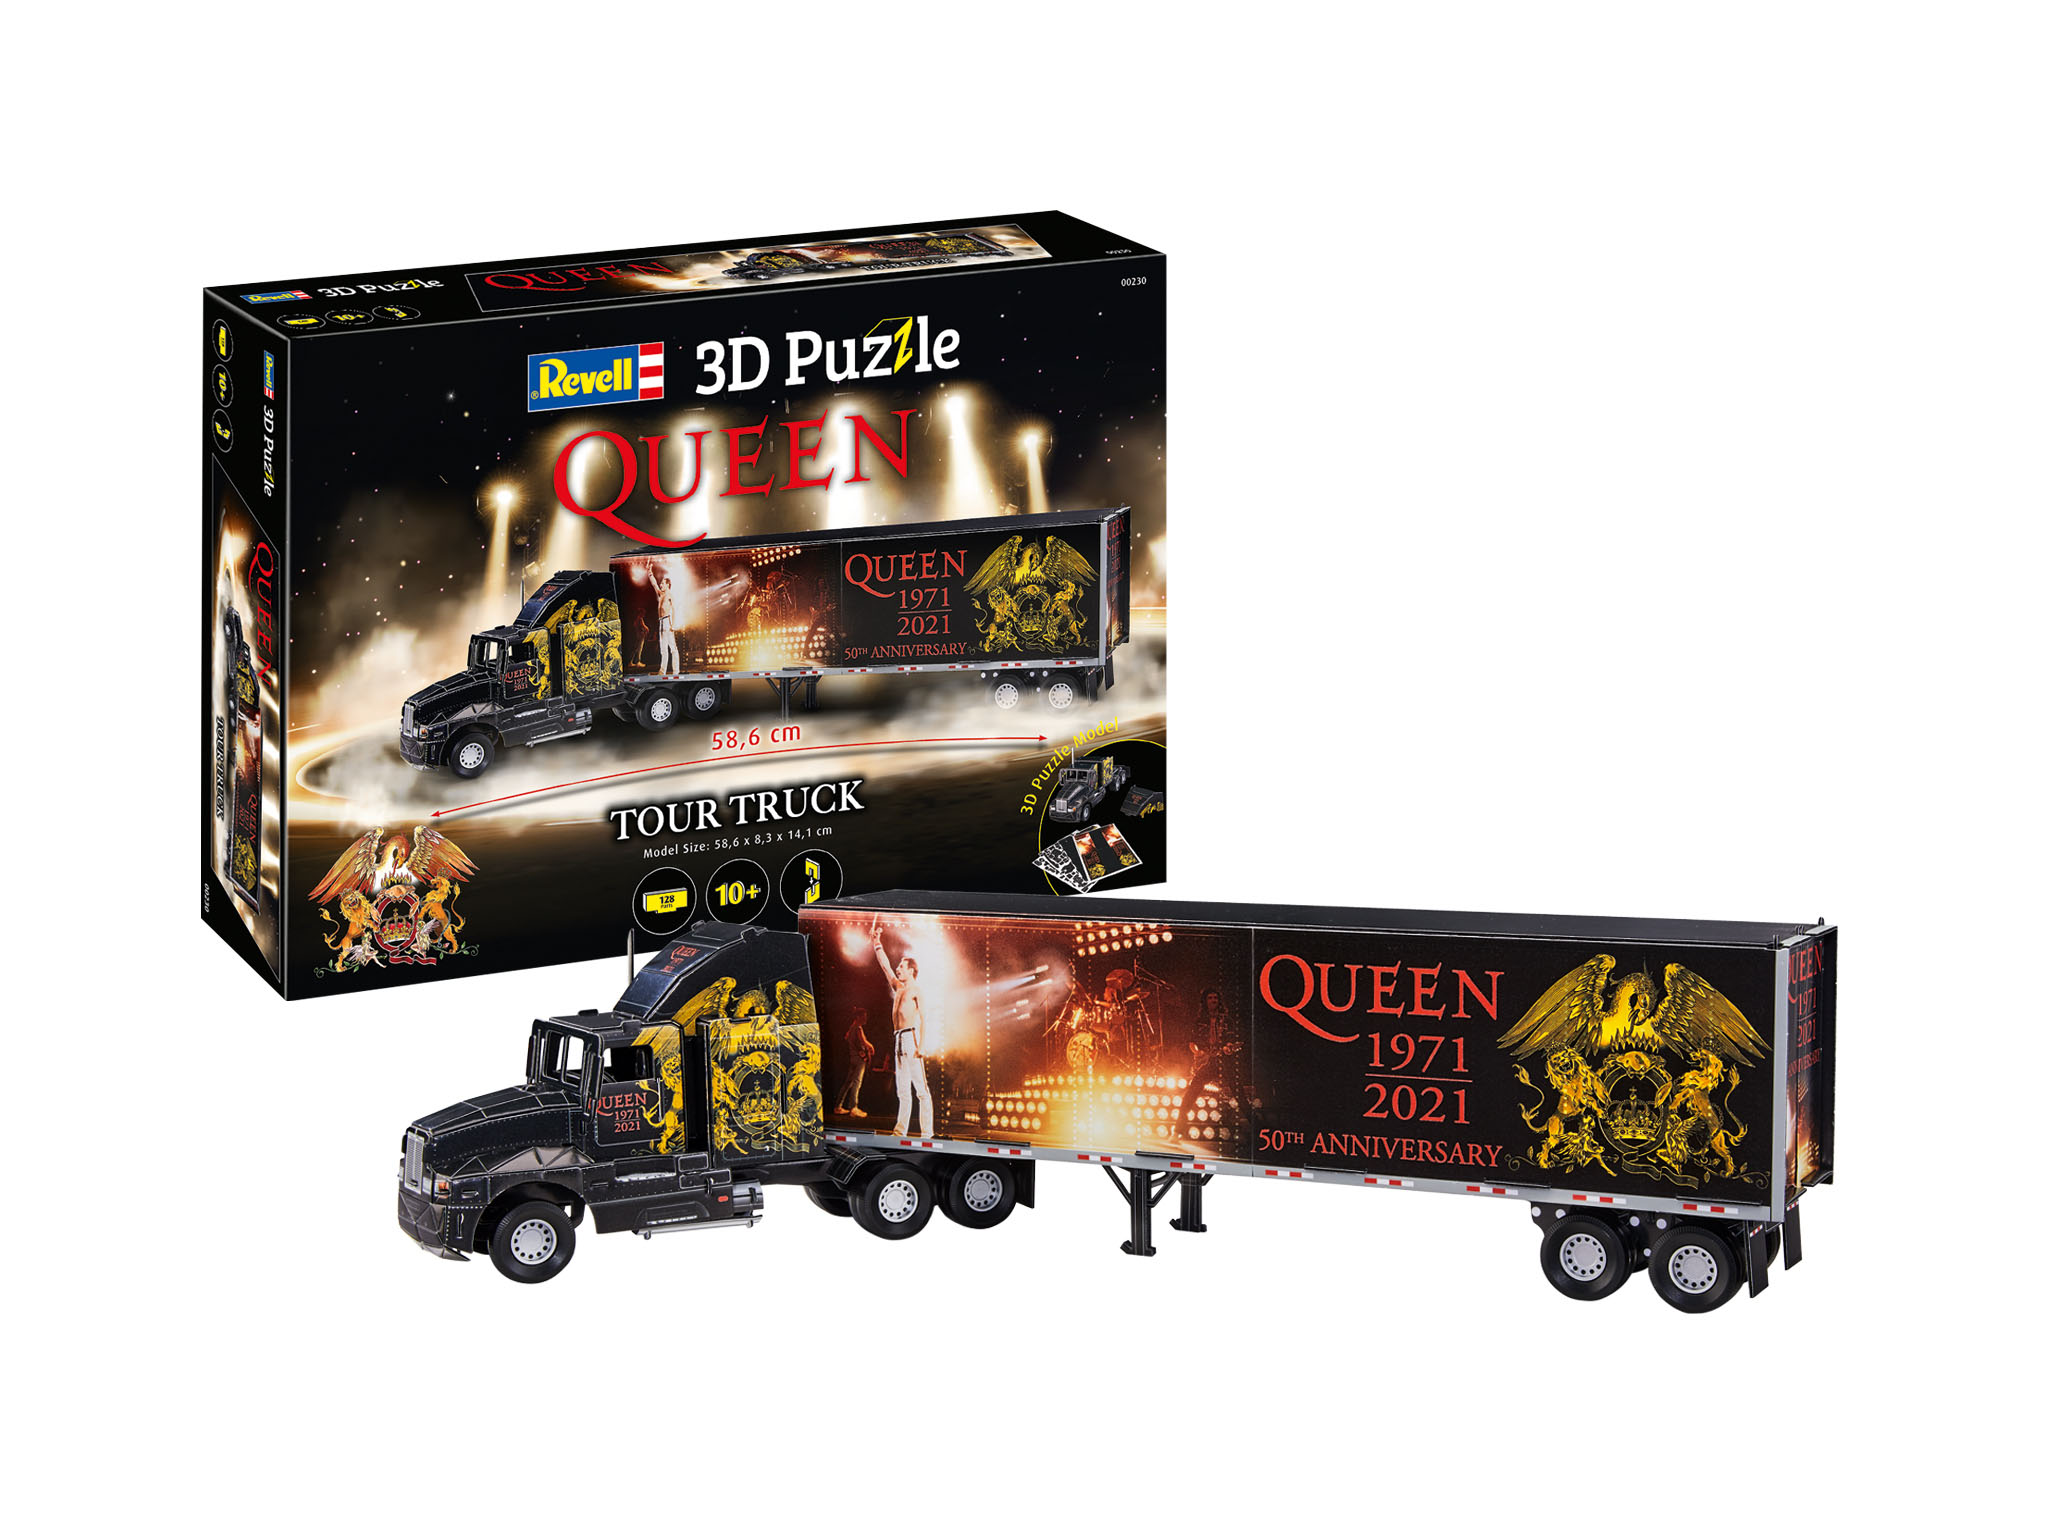 Revell 3D Puzzle 00230 QUEEN Tour Truck - 50th Anniversary